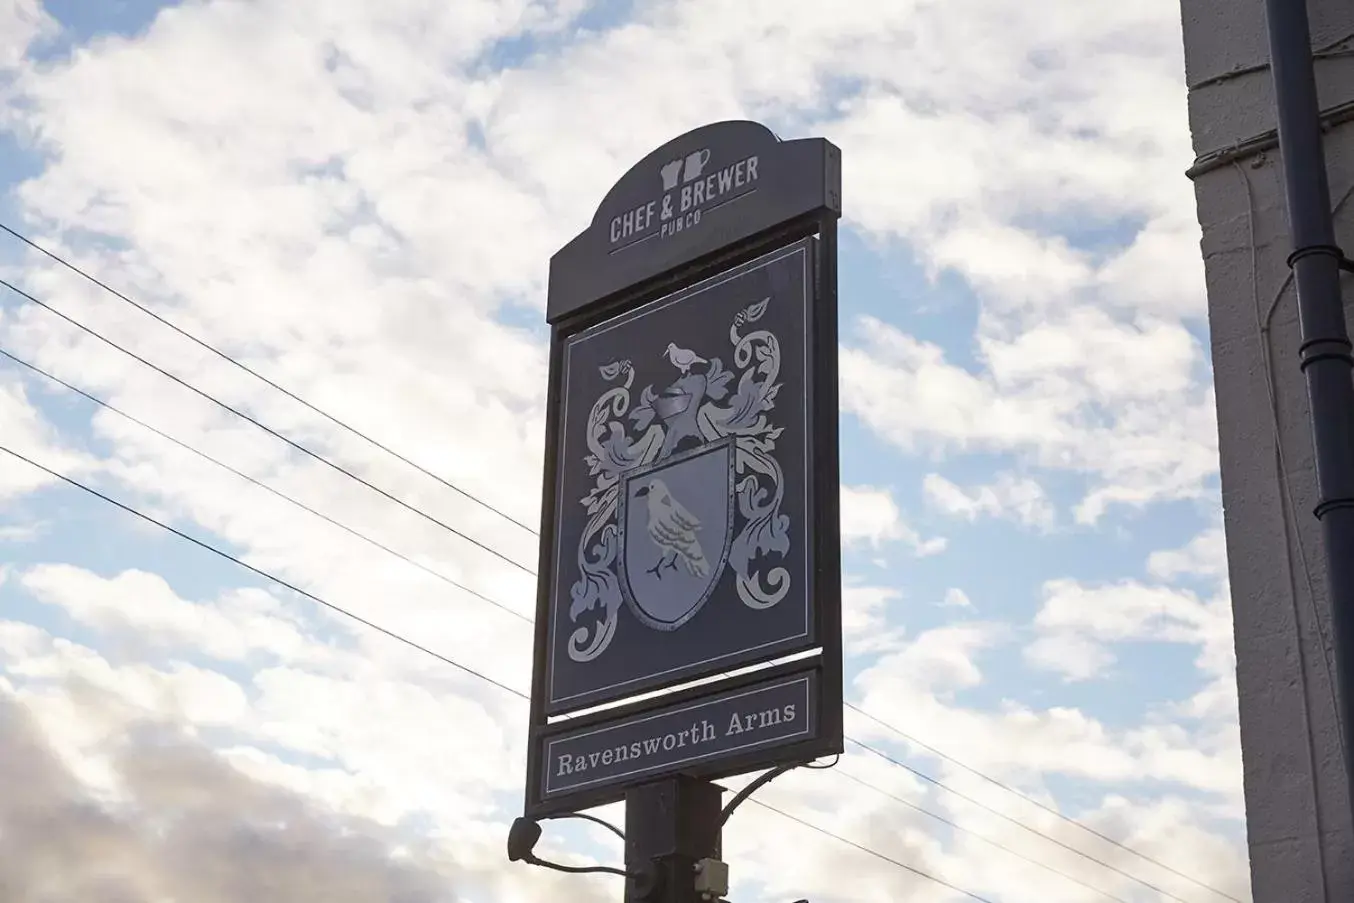 Property Logo/Sign in Ravensworth Arms by Chef & Brewer Collection